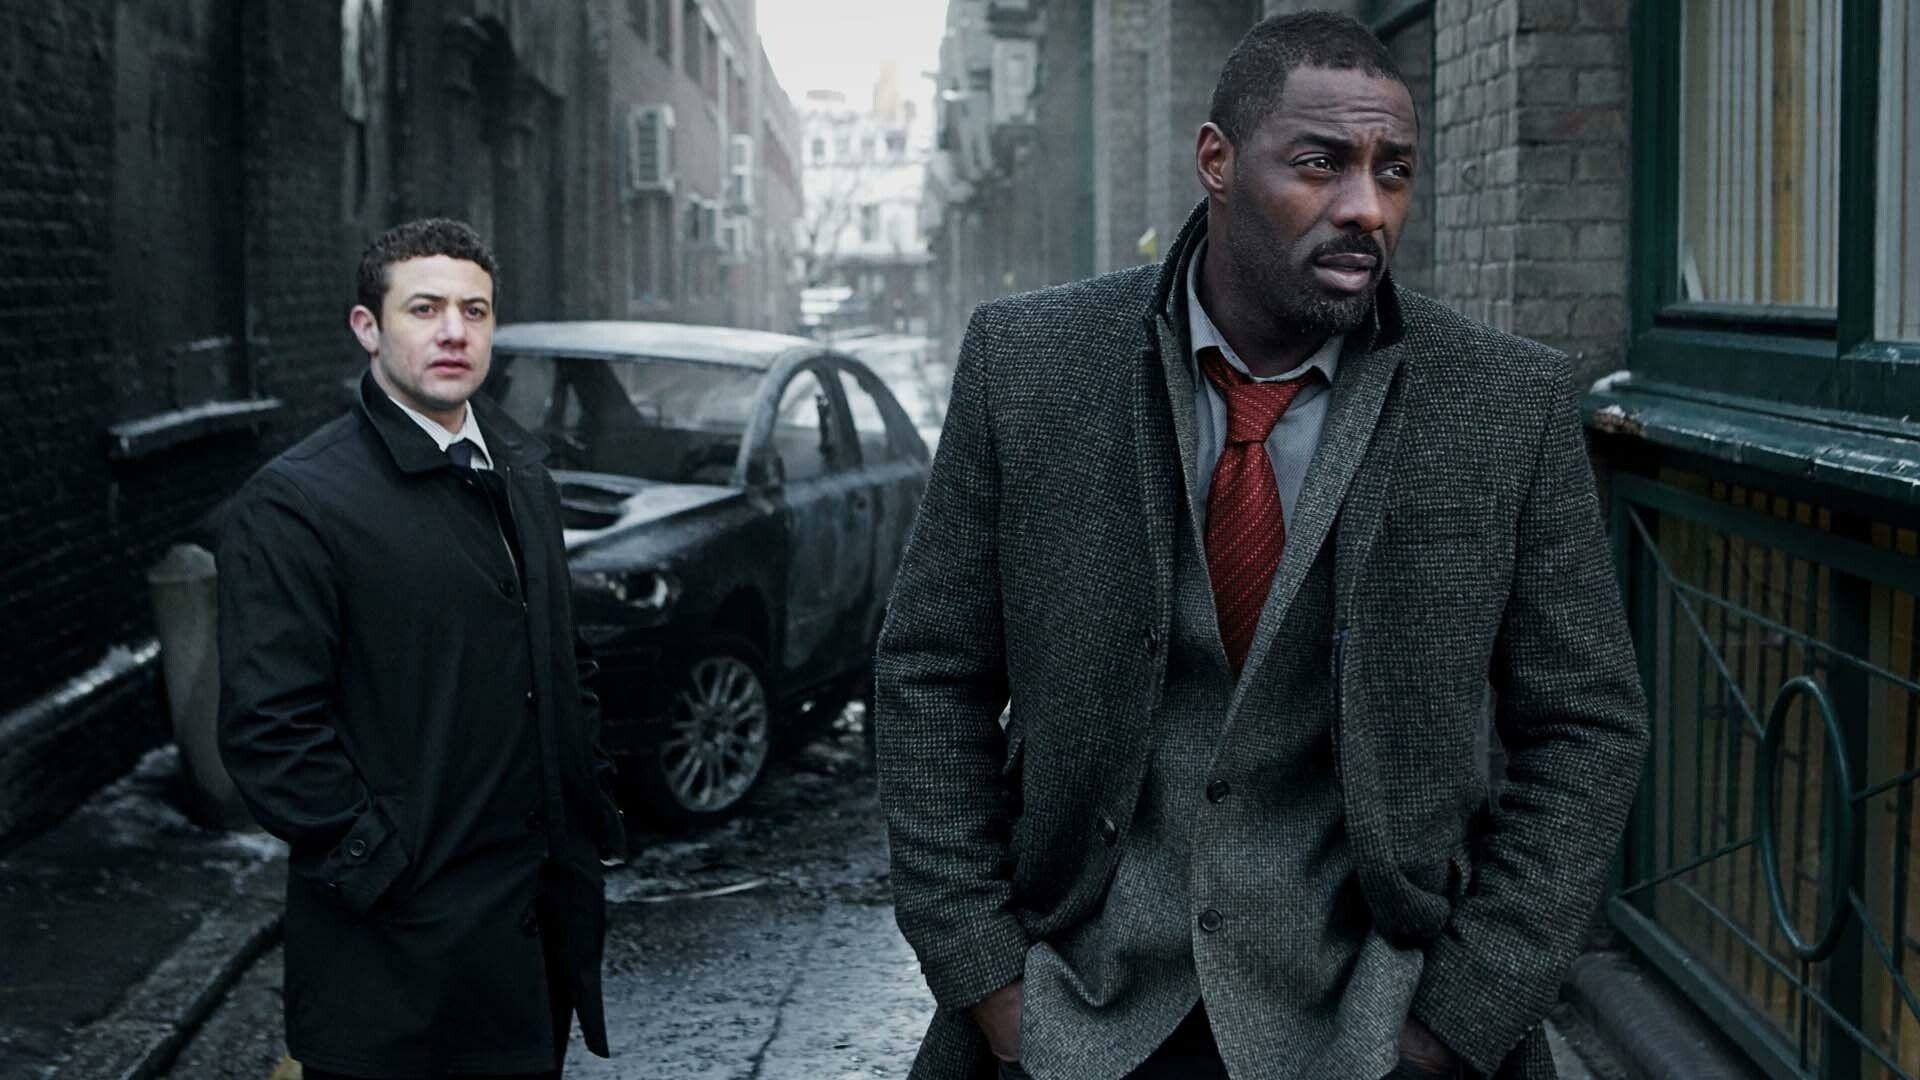 Luther (TV series): Detective Sergeant Justin Ripley, played by Warren Brown, Idris Elba. 1920x1080 Full HD Background.